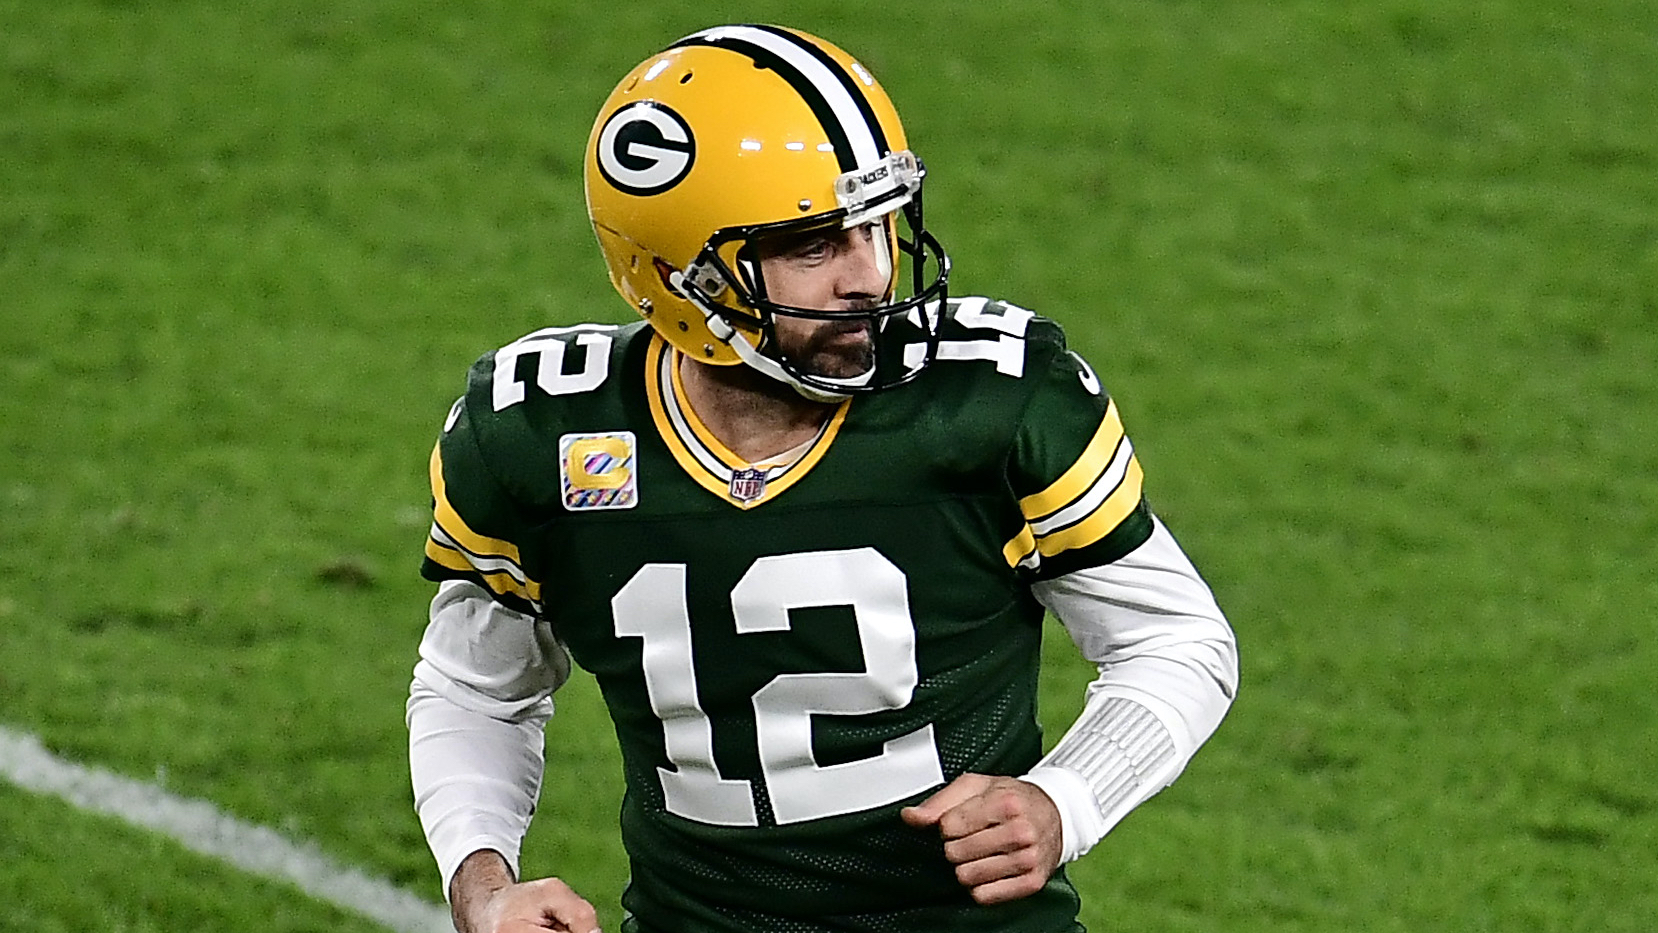 Freedman’s NFL Week 10 Trends & Early Bets: Rodgers at Lambeau is Easy Pick article feature image